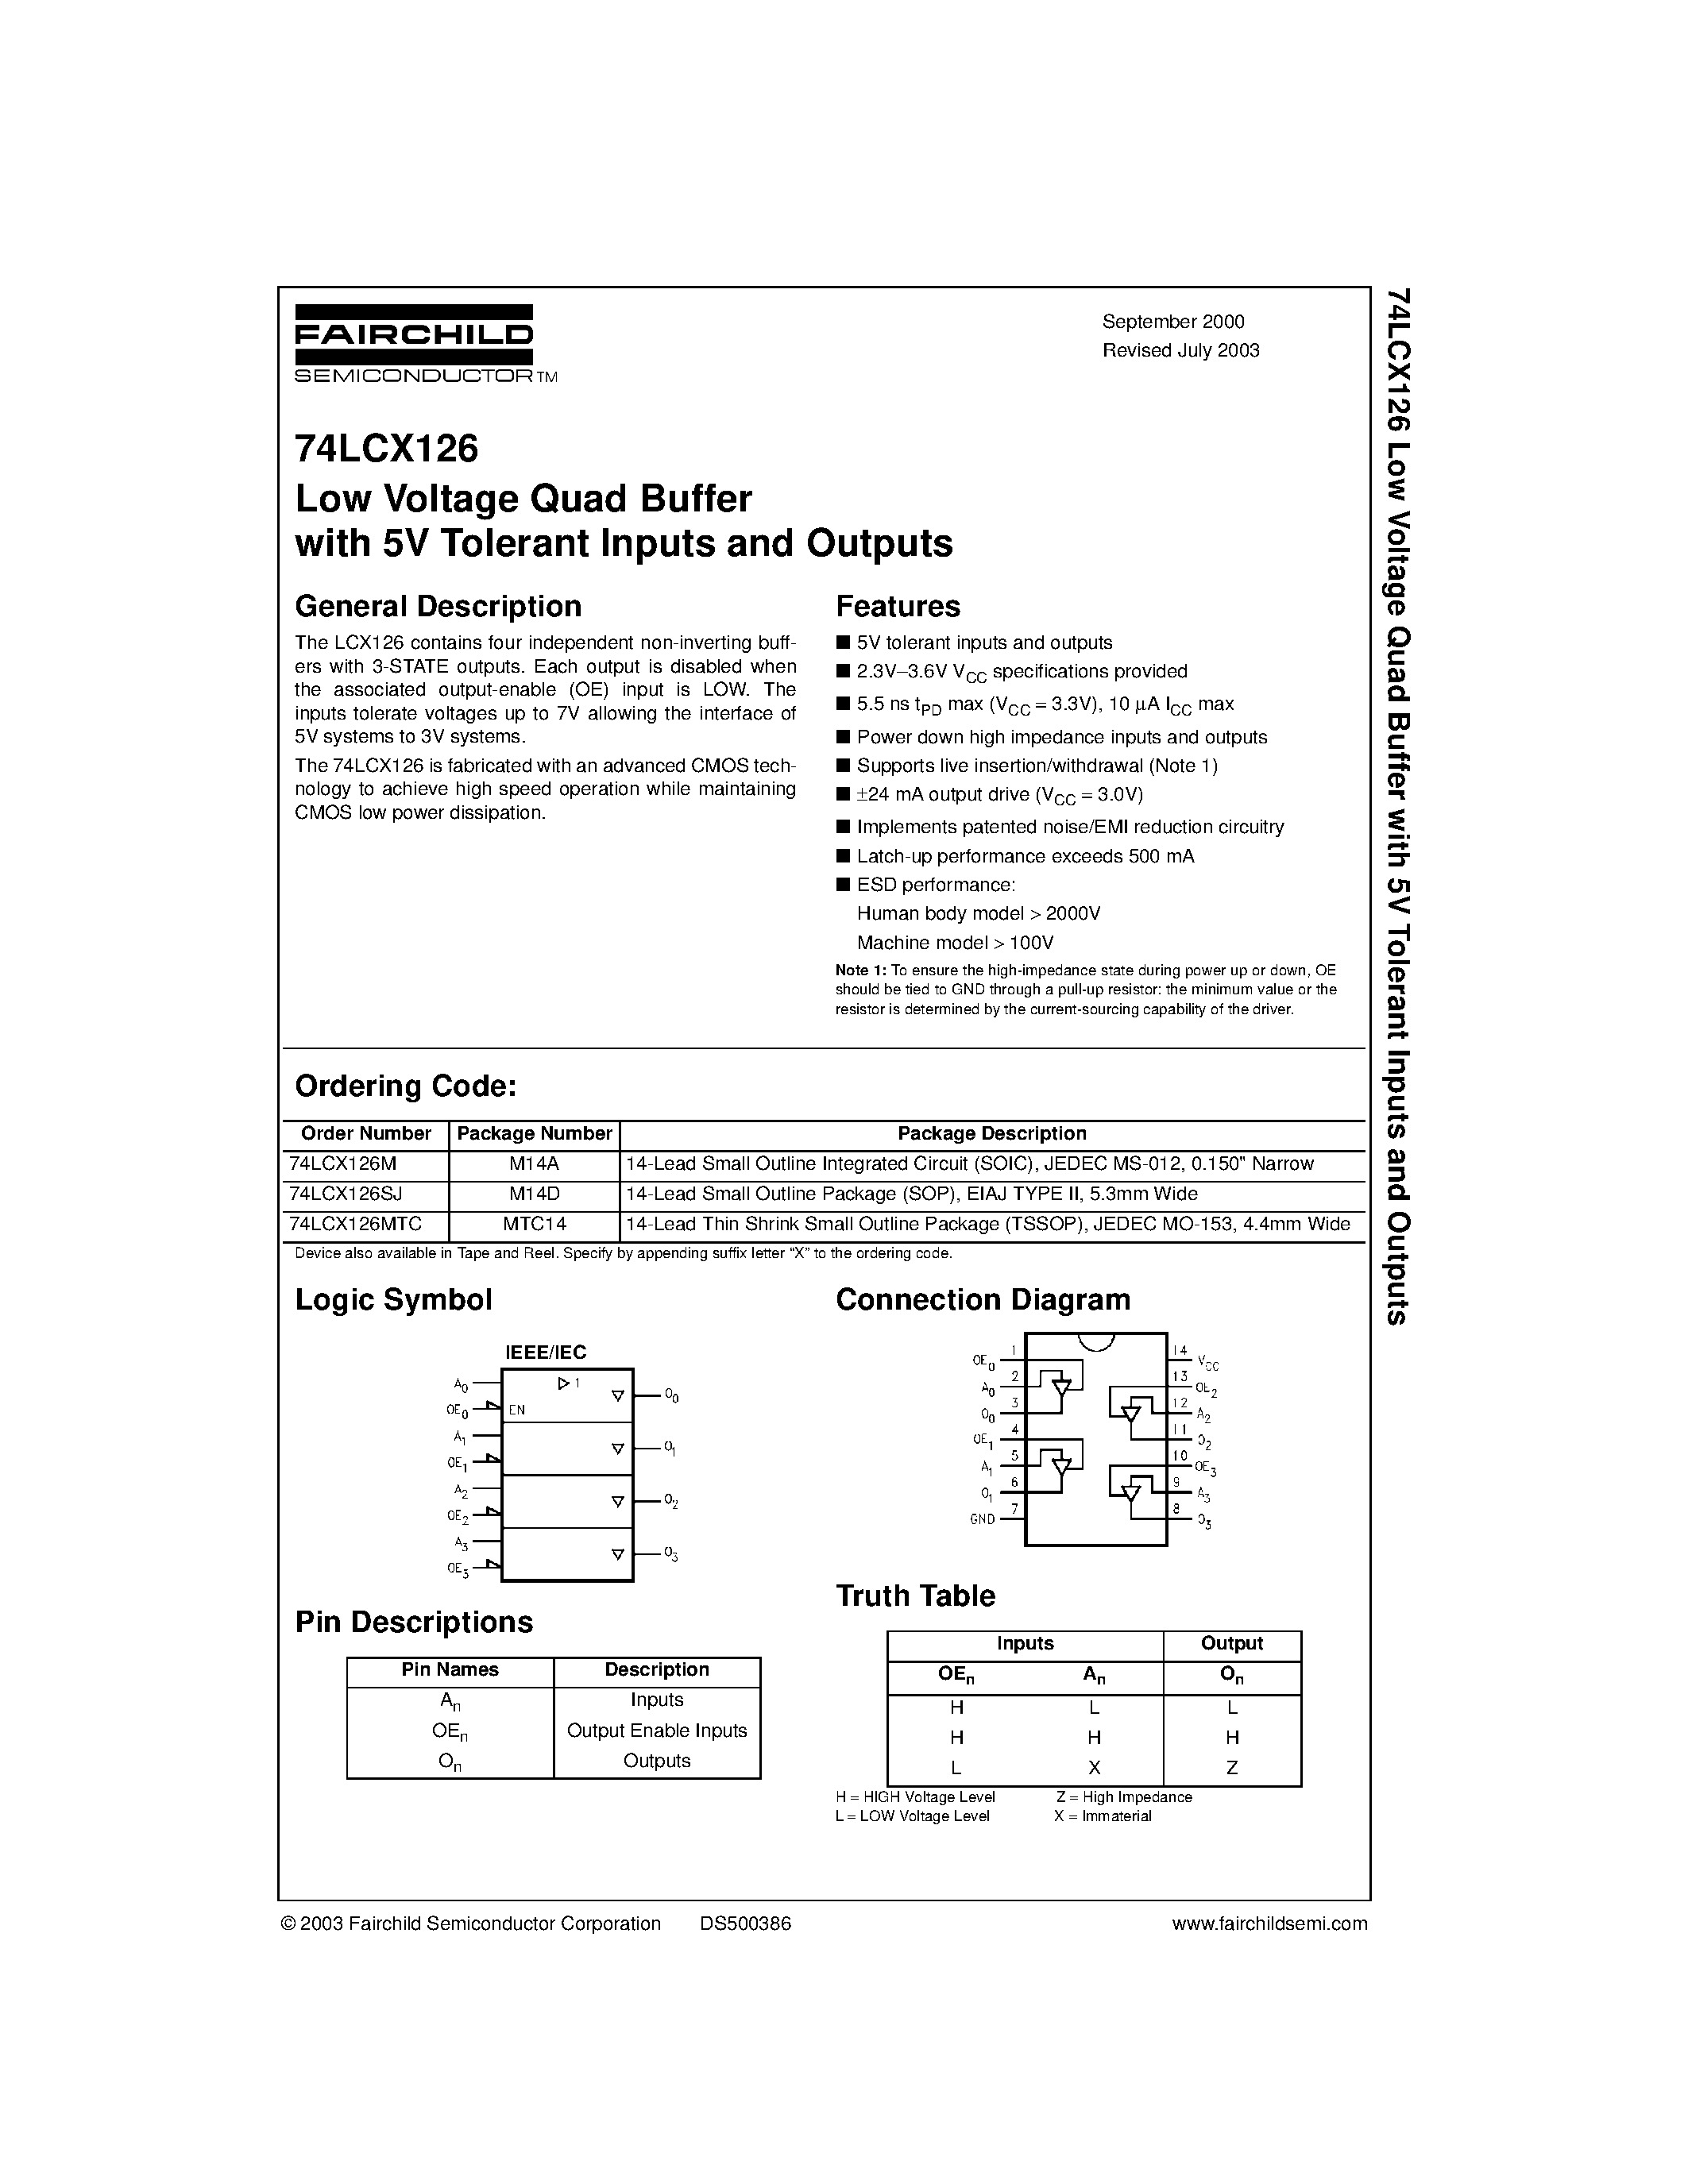 Datasheet 74LCX126MTC - Low Voltage Quad Buffer with 5V Tolerant Inputs and Outputs page 1